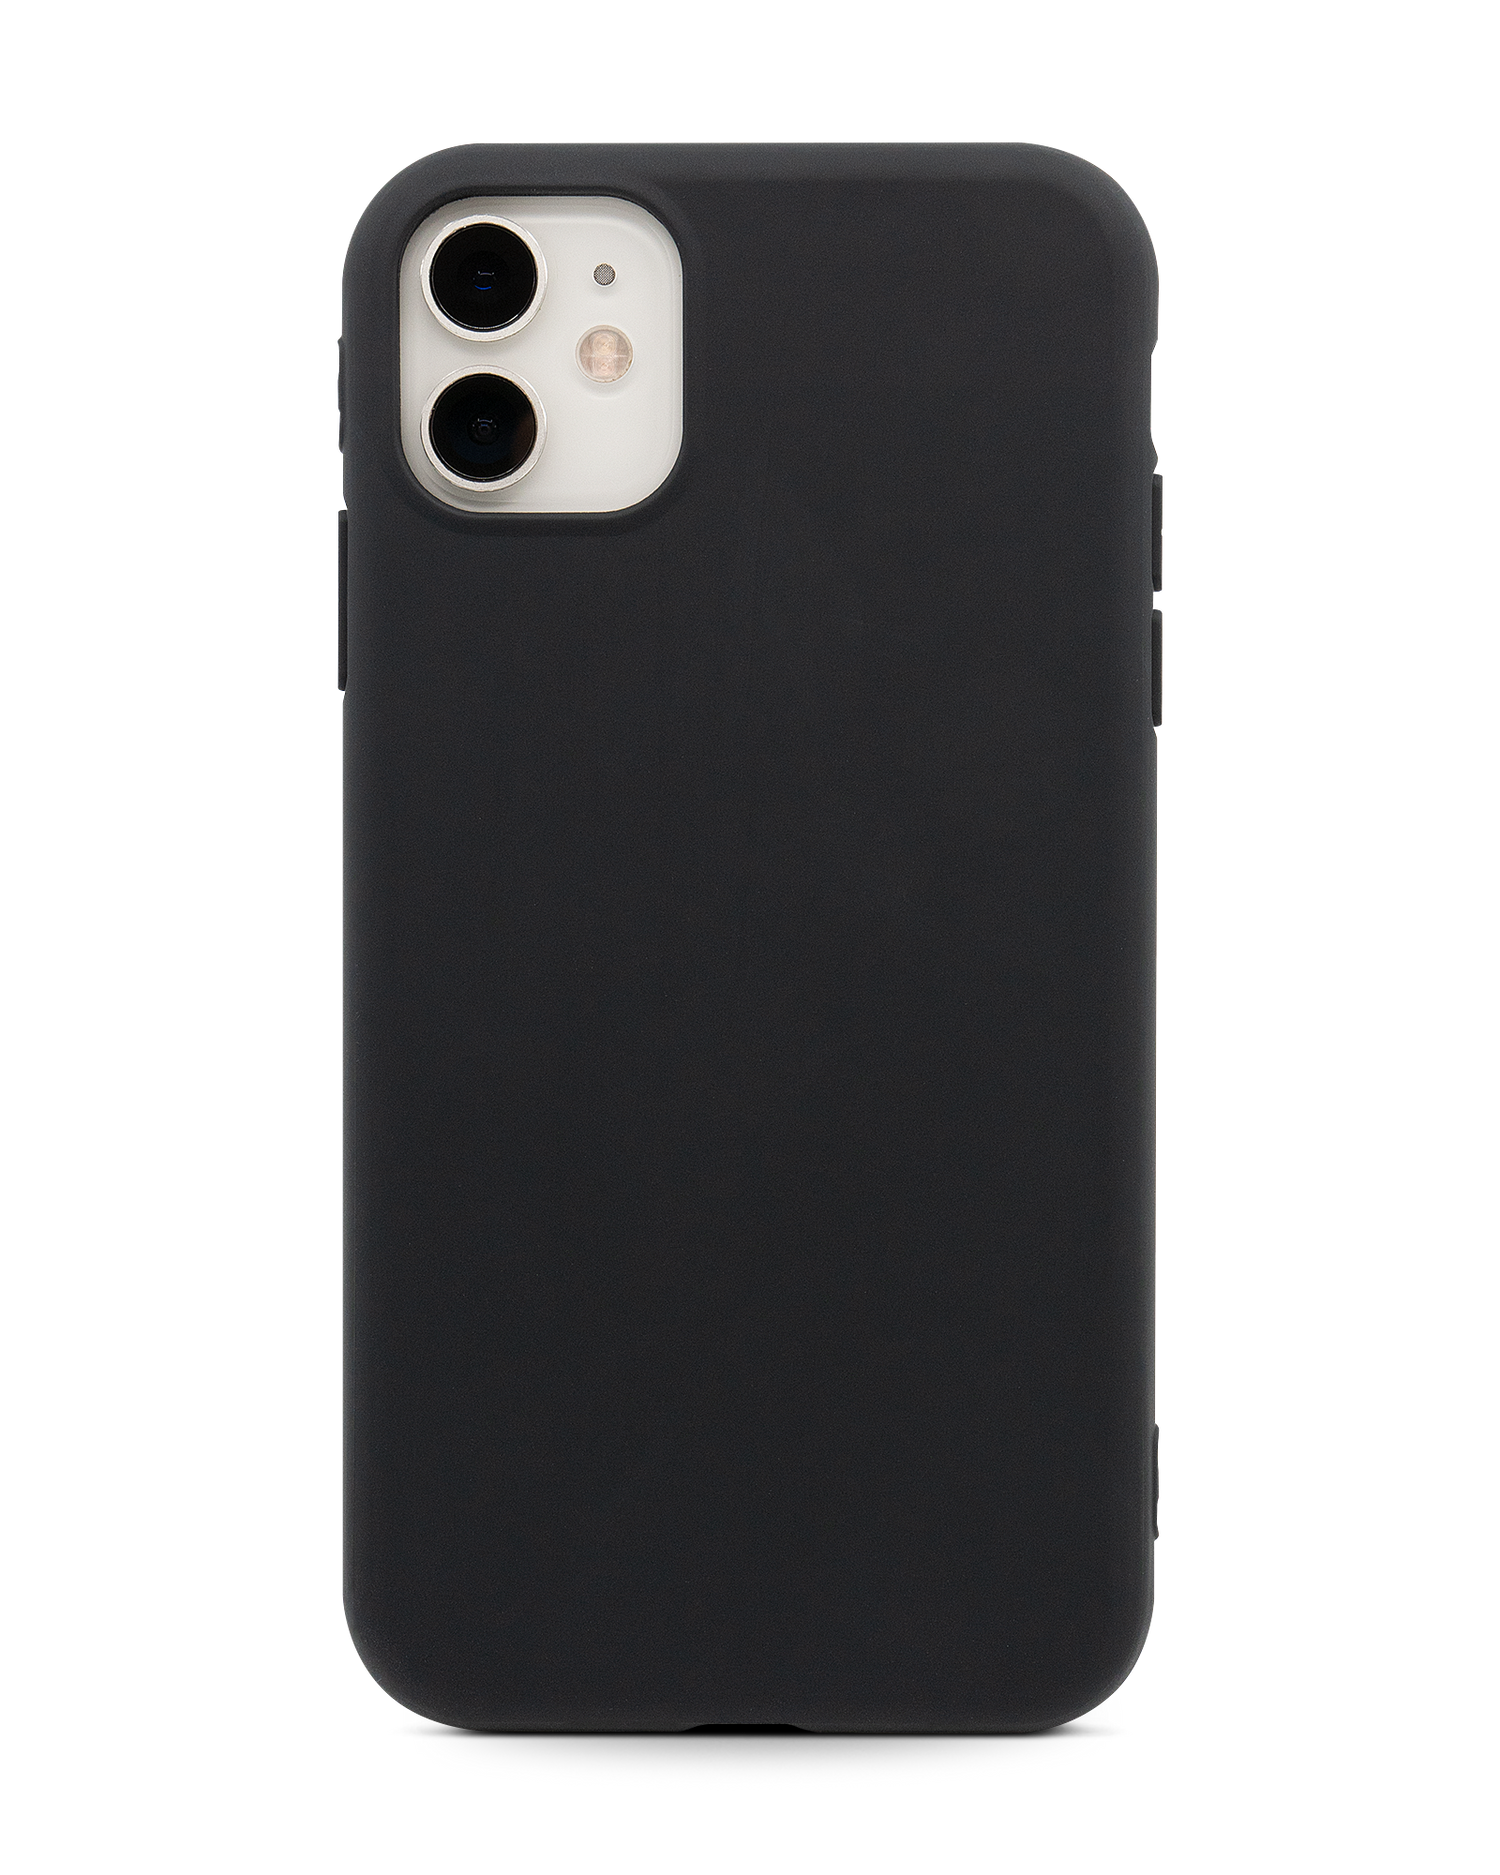 Black Silicone Phone Case for iPhone 11: Front view